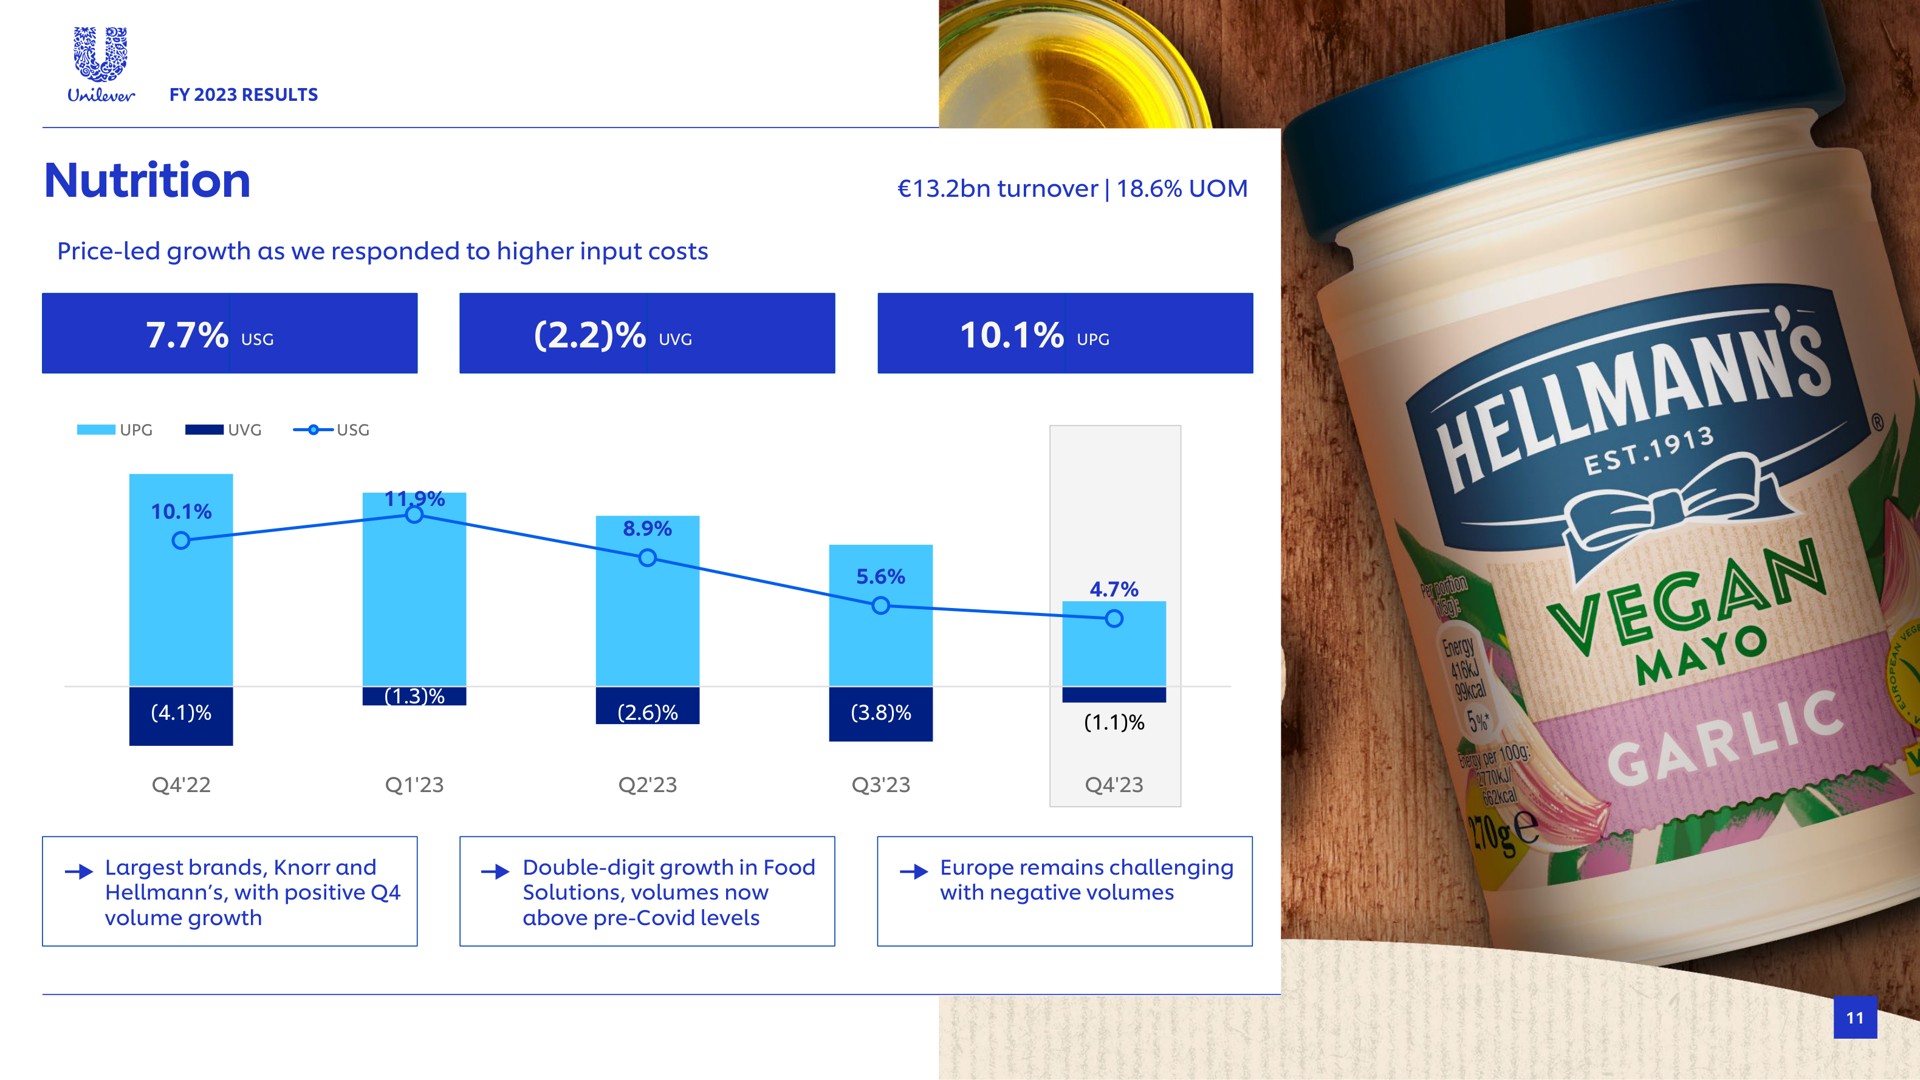 nutrition turnover price led growth as we responded to higher input costs cry brands and with positive volume growth double digit growth in food solutions volumes now above covid levels remains challenging with negative volumes | Unilever